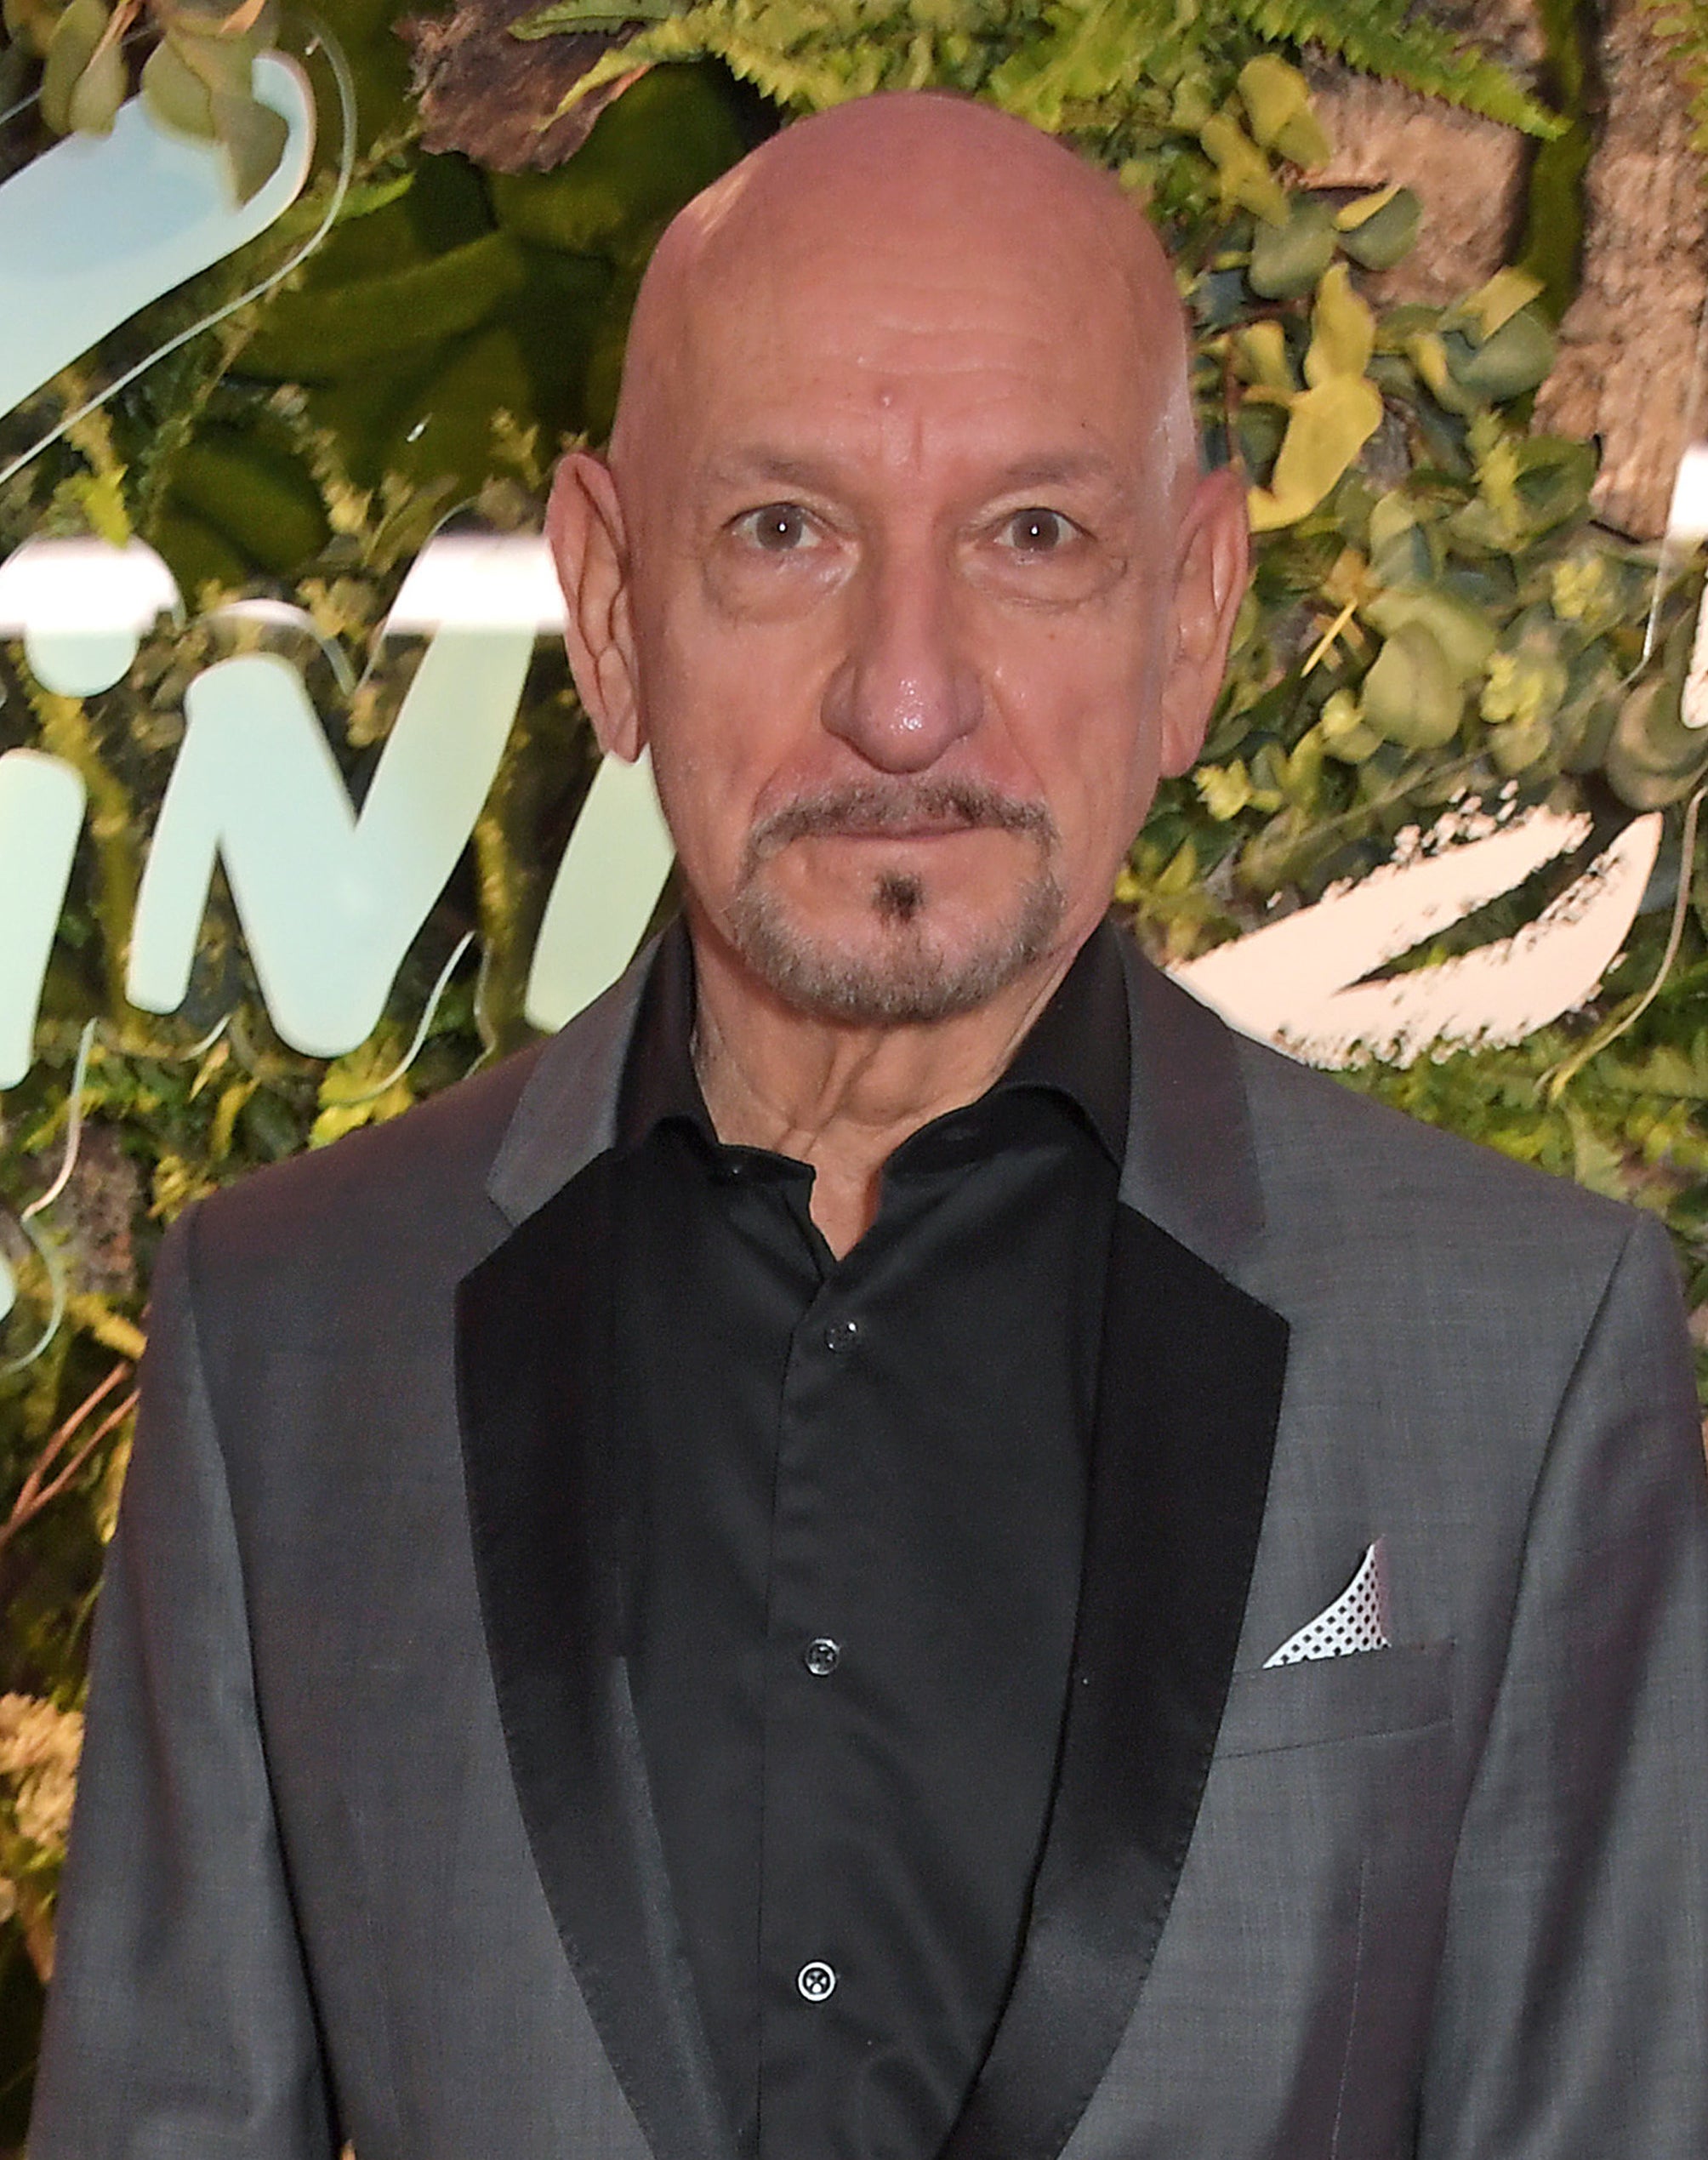 Ben Kingsley looking serious at an event